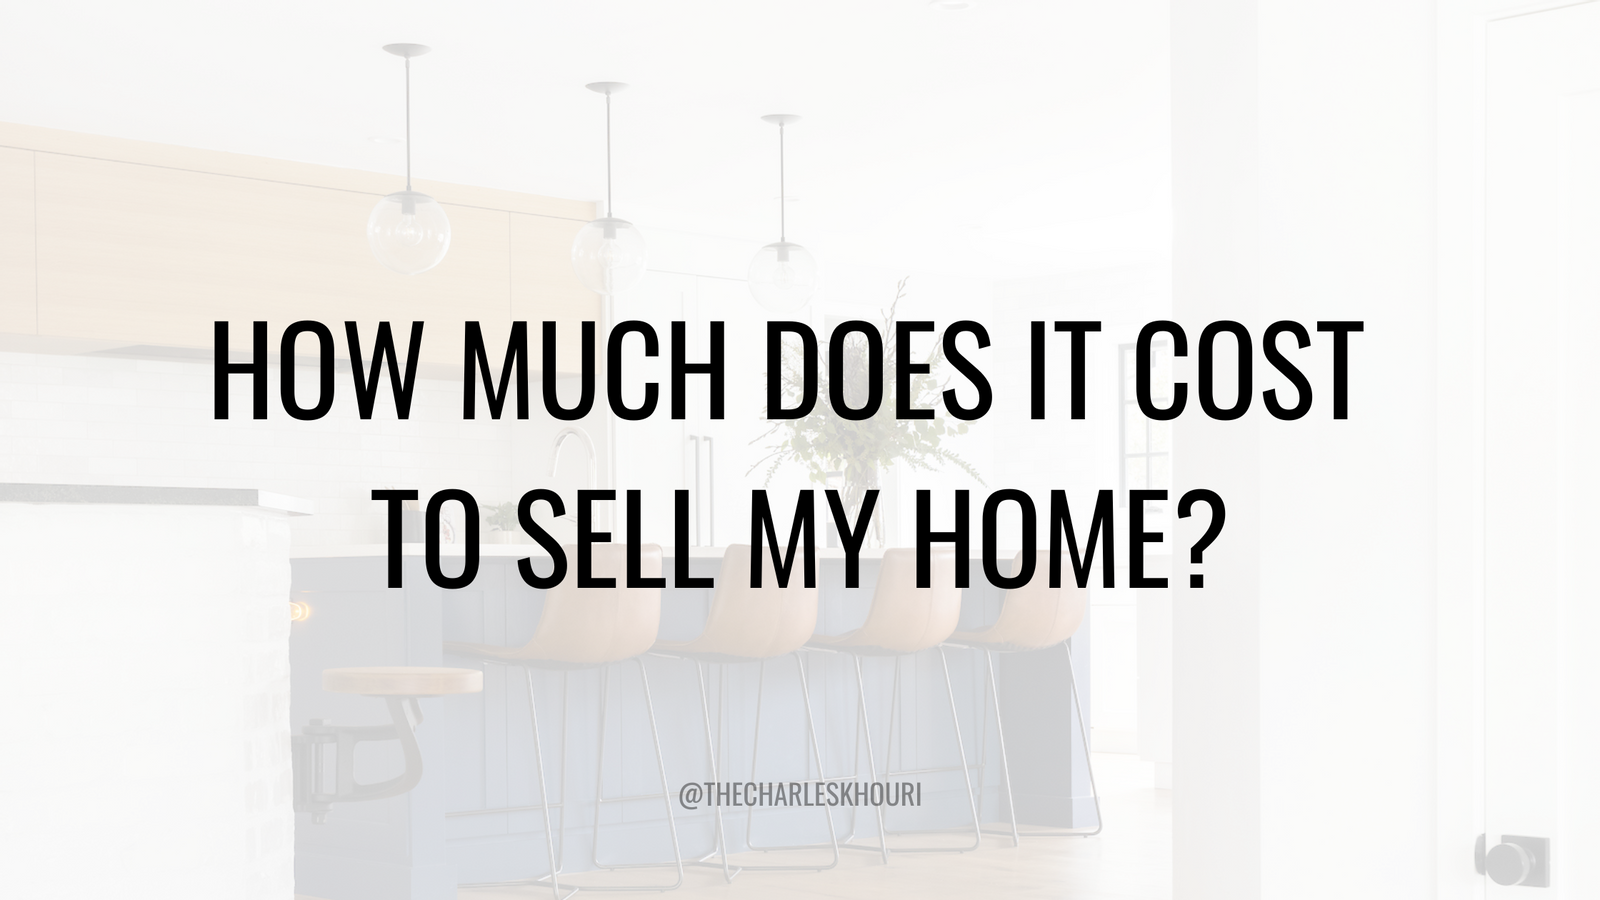 How much does it cost to sell my home?